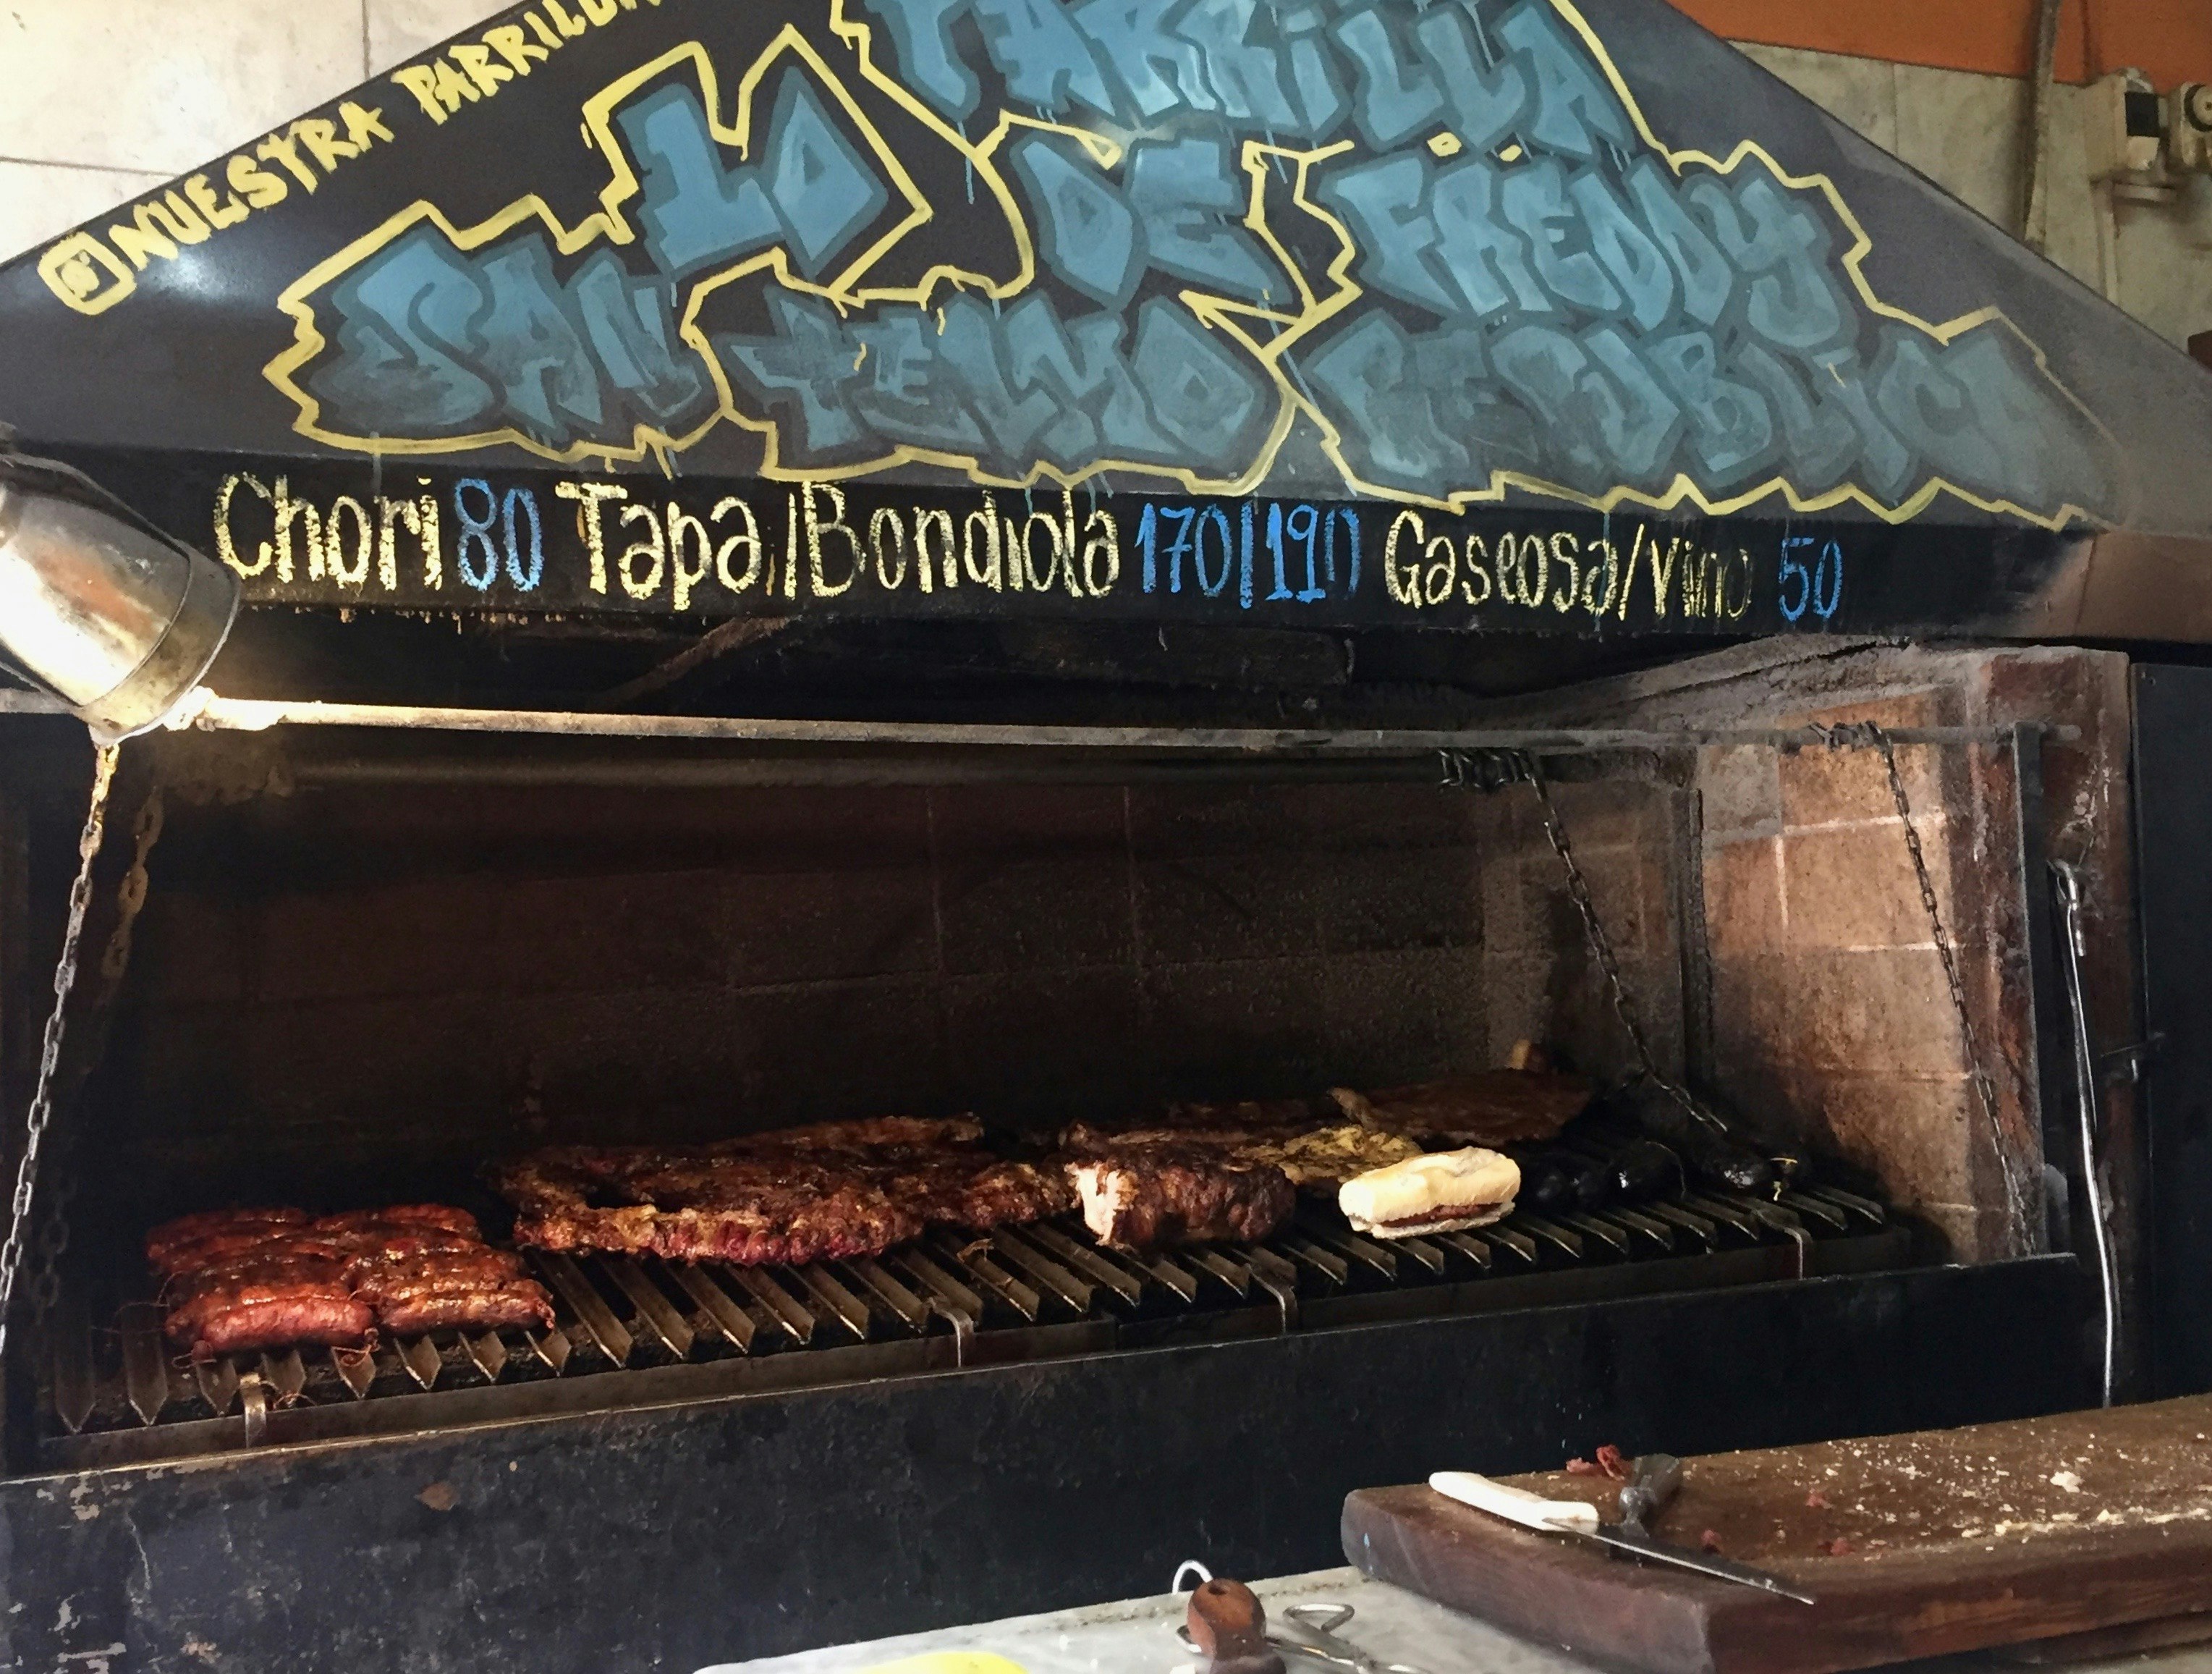 Steaks and sausages cooking on the very old and well-used grill at Lo de Freddy. The grill hood has the stand's details in blue graffiti.